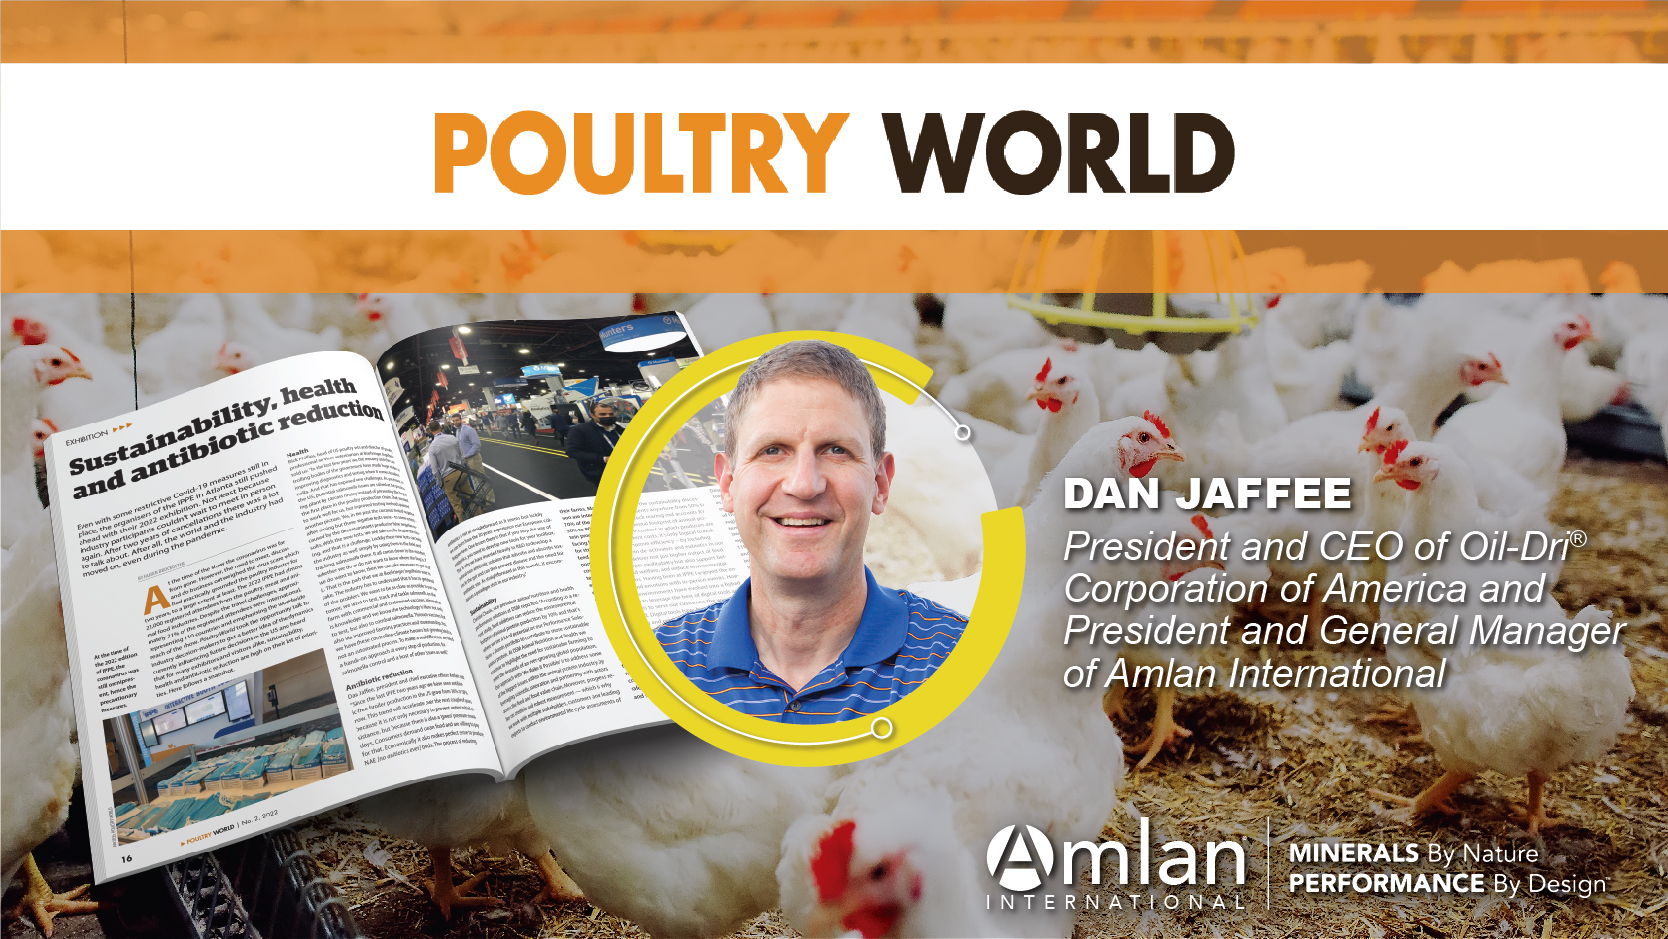 Poultry World magazine with Dan Jaffee text graphic.